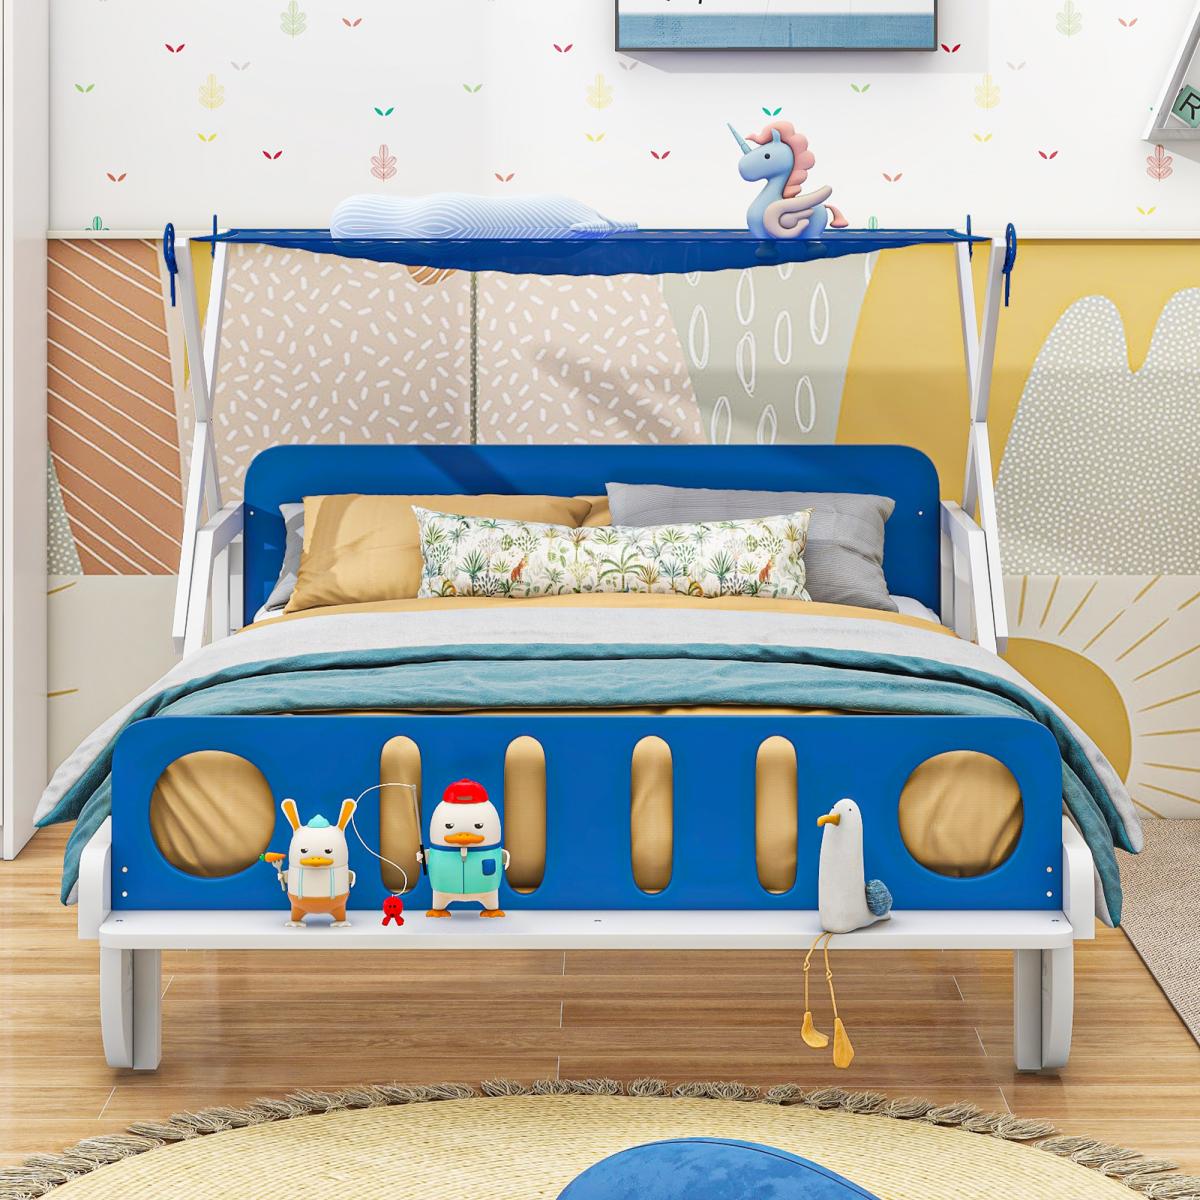 Wood Twin Size Car Bed with Ceiling Cloth, Headboard and Footboard, White+Blue